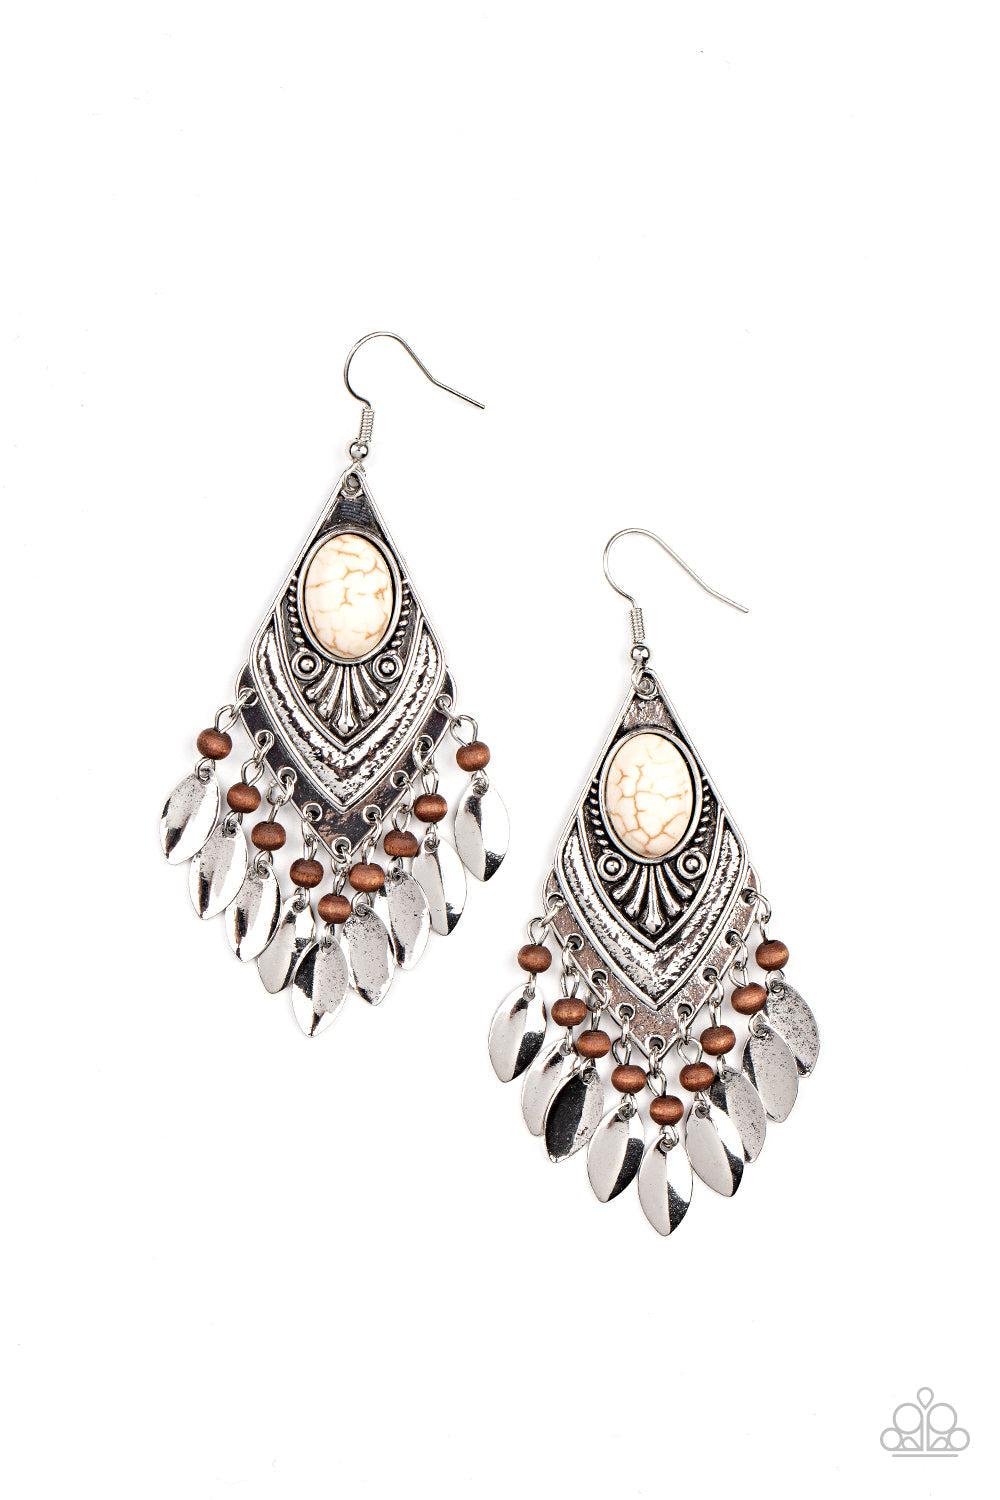 Earthy Etiquette White Stone Earrings - Paparazzi Accessories- lightbox - CarasShop.com - $5 Jewelry by Cara Jewels